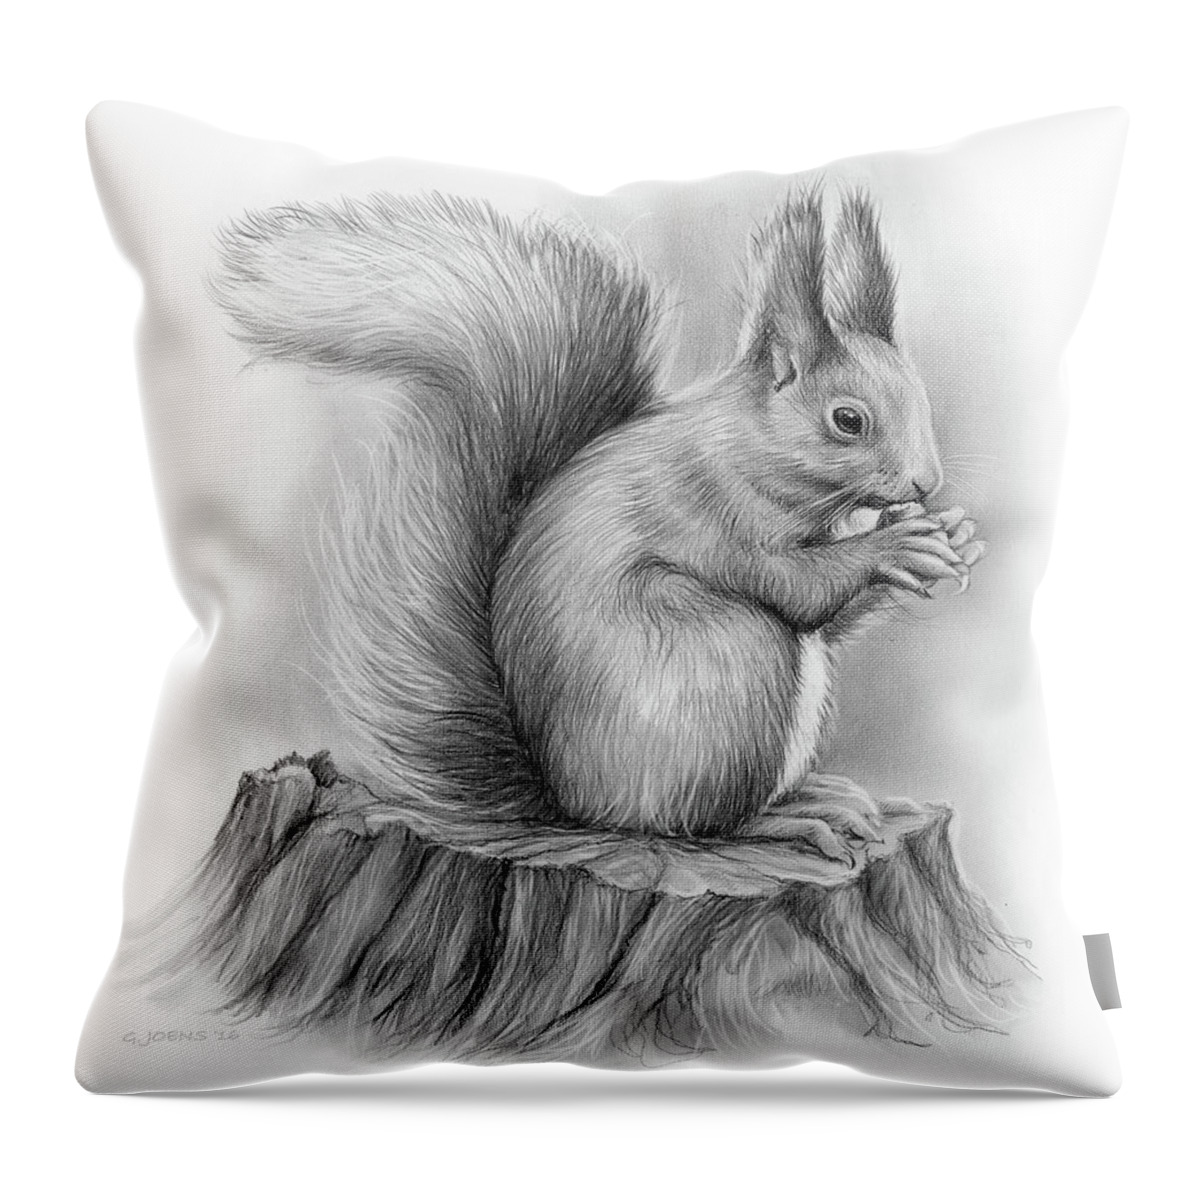 Squirrel Throw Pillow featuring the drawing Squirrel by Greg Joens